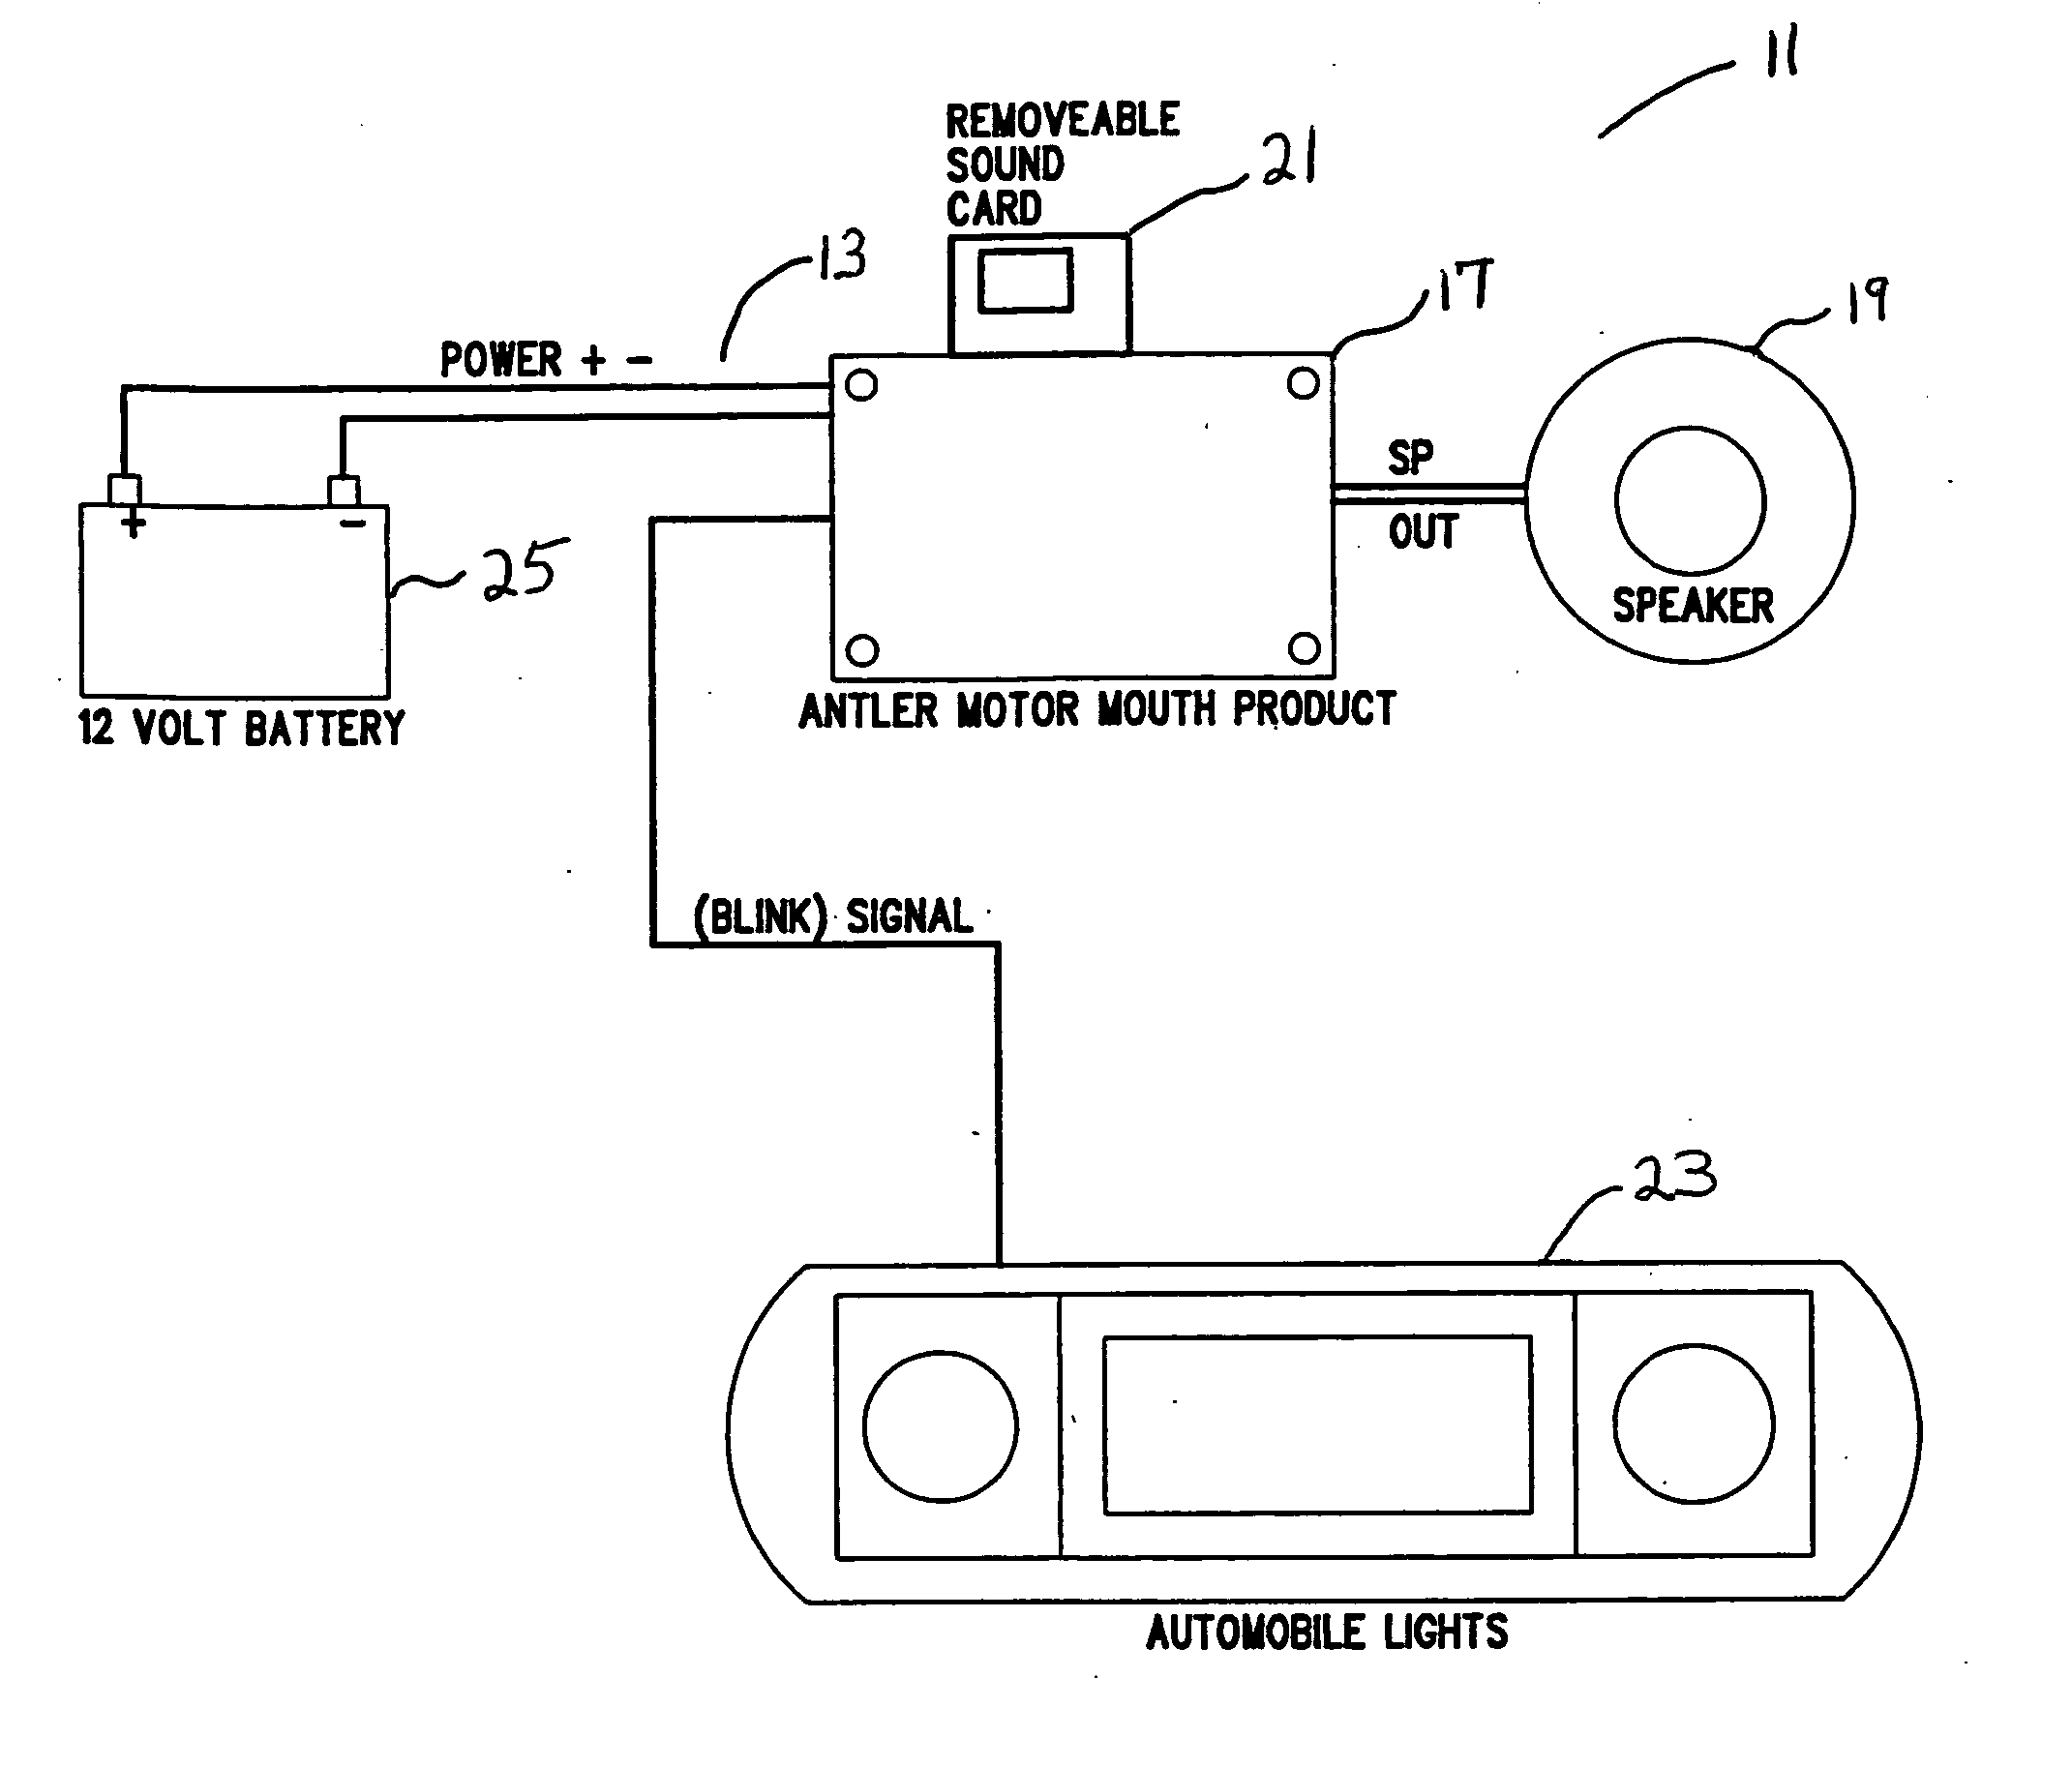 Method and system for providing a selectable audio signal